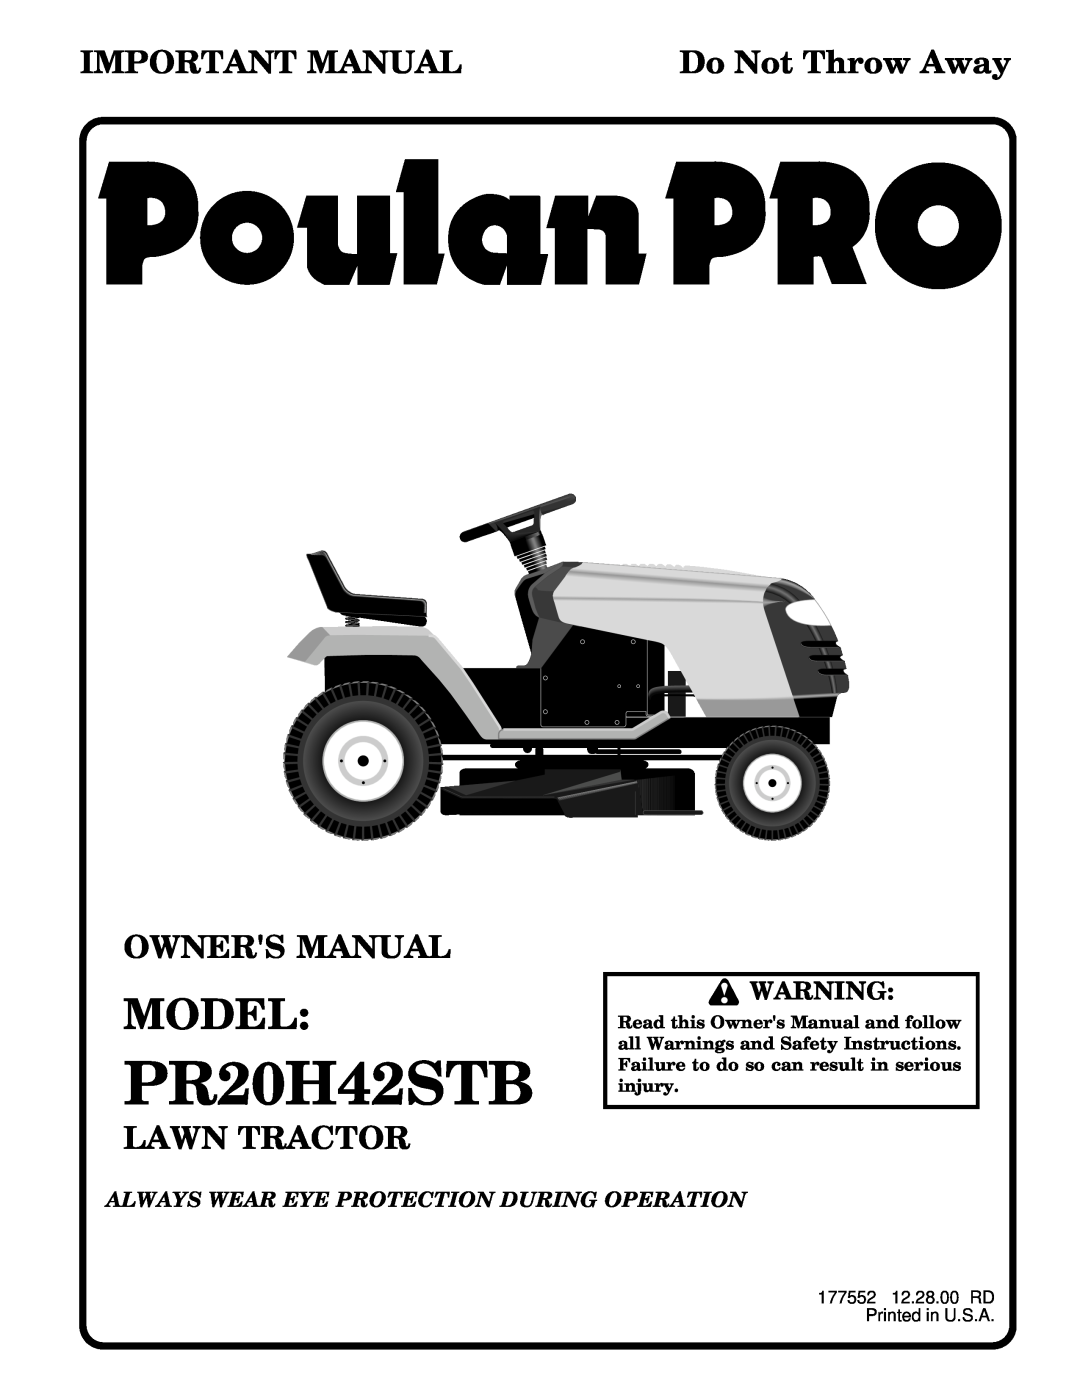 Poulan 177552 owner manual Model, PR20H42STB, Important Manual, Do Not Throw Away, Lawn Tractor 